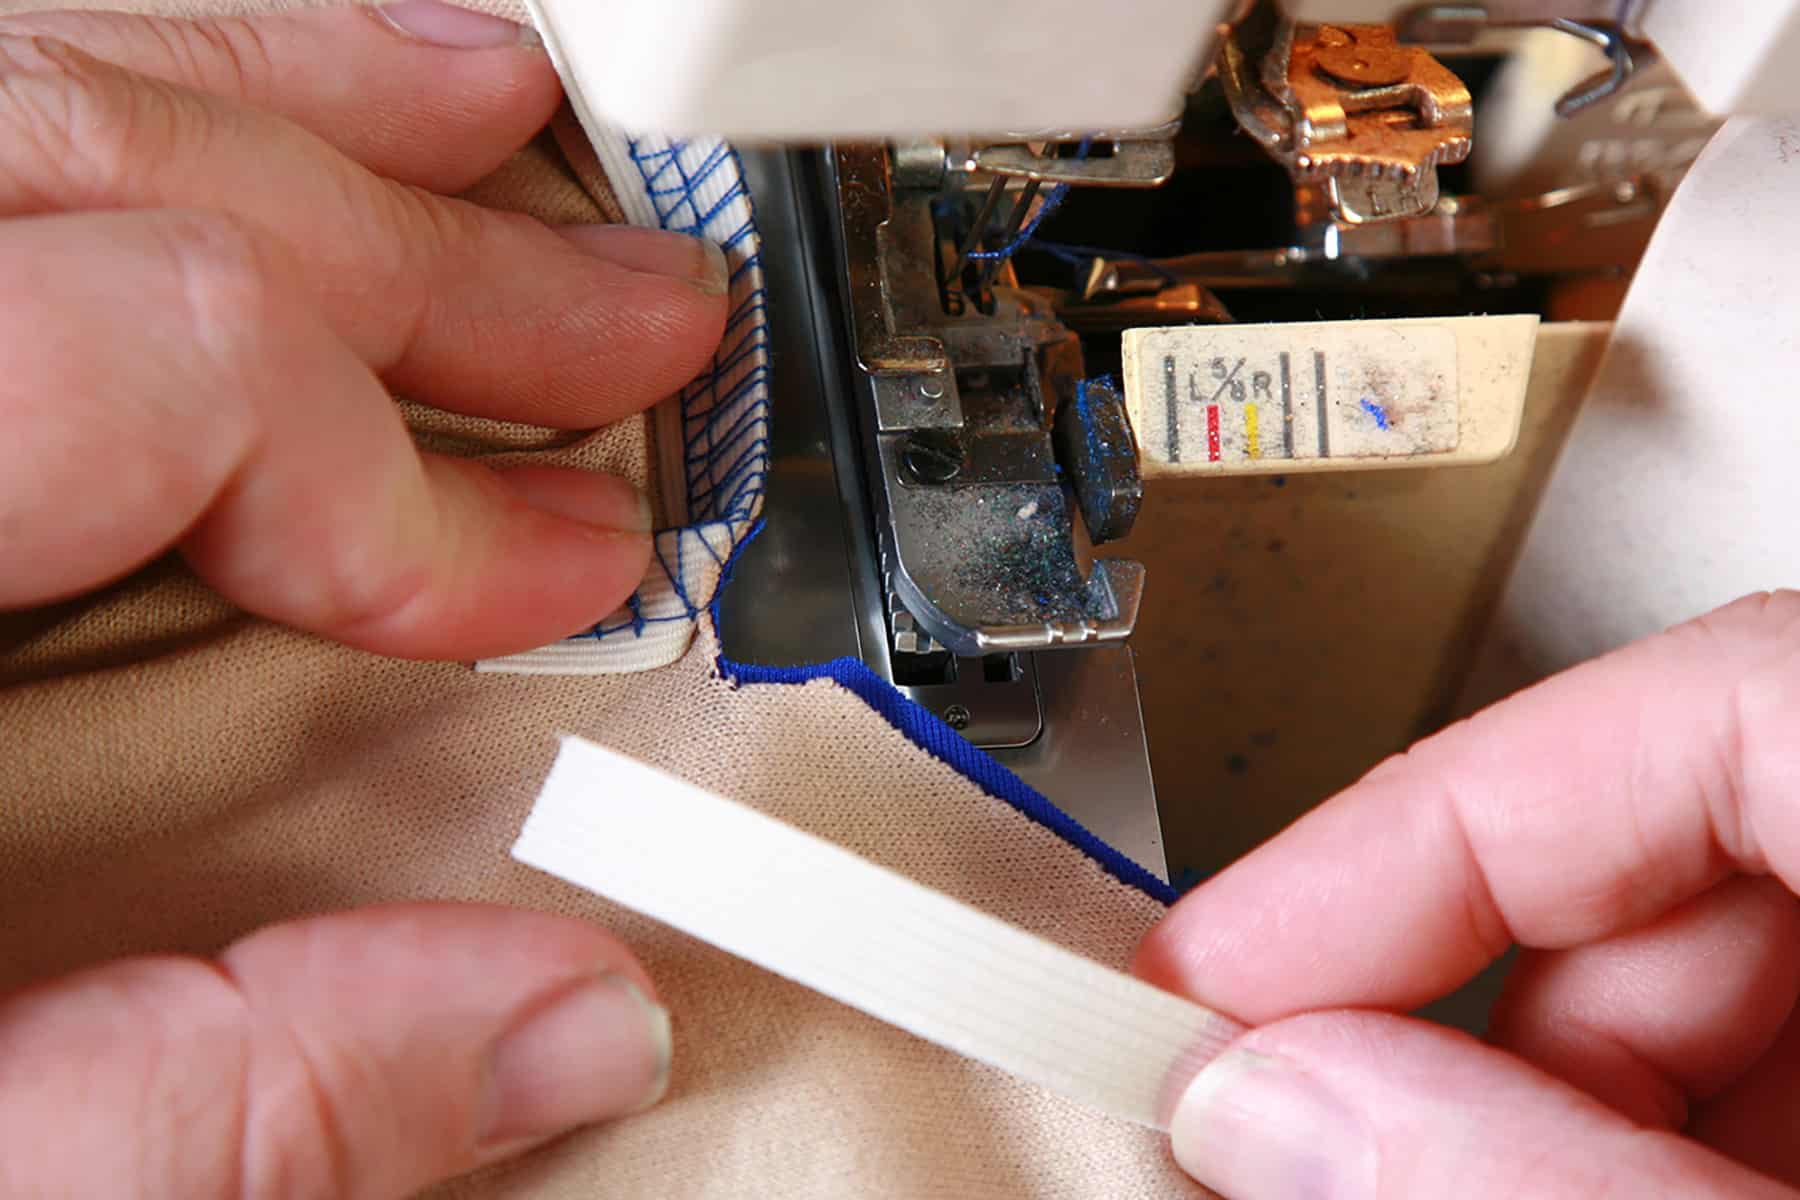 Elastic is being applied to the V, as described in the tutorial.